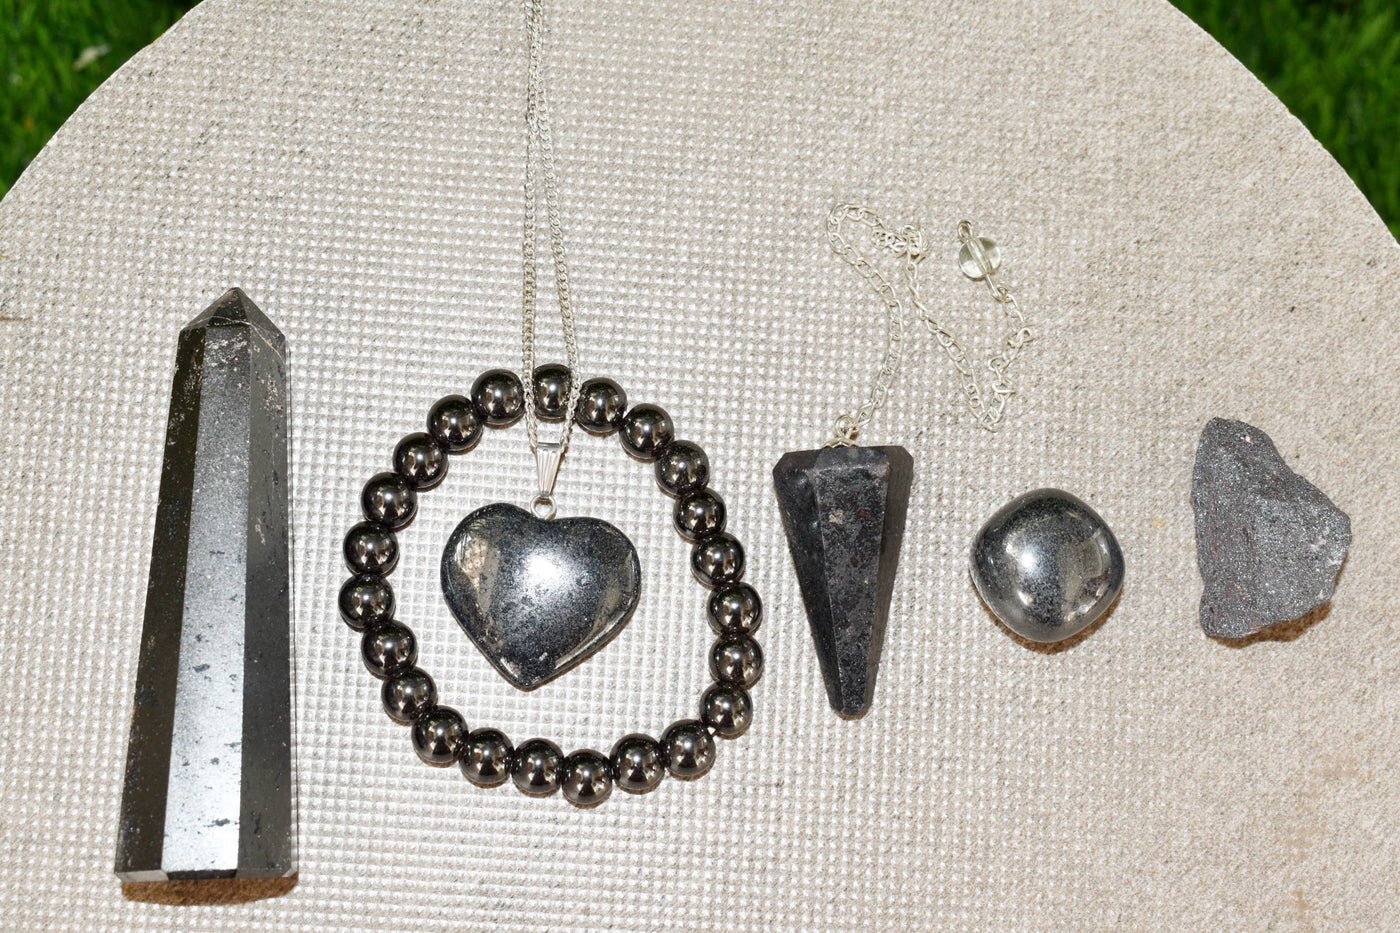 Hematite Crystal Gift Set For Emotional Support and Protection, Real Polished Gemstones.